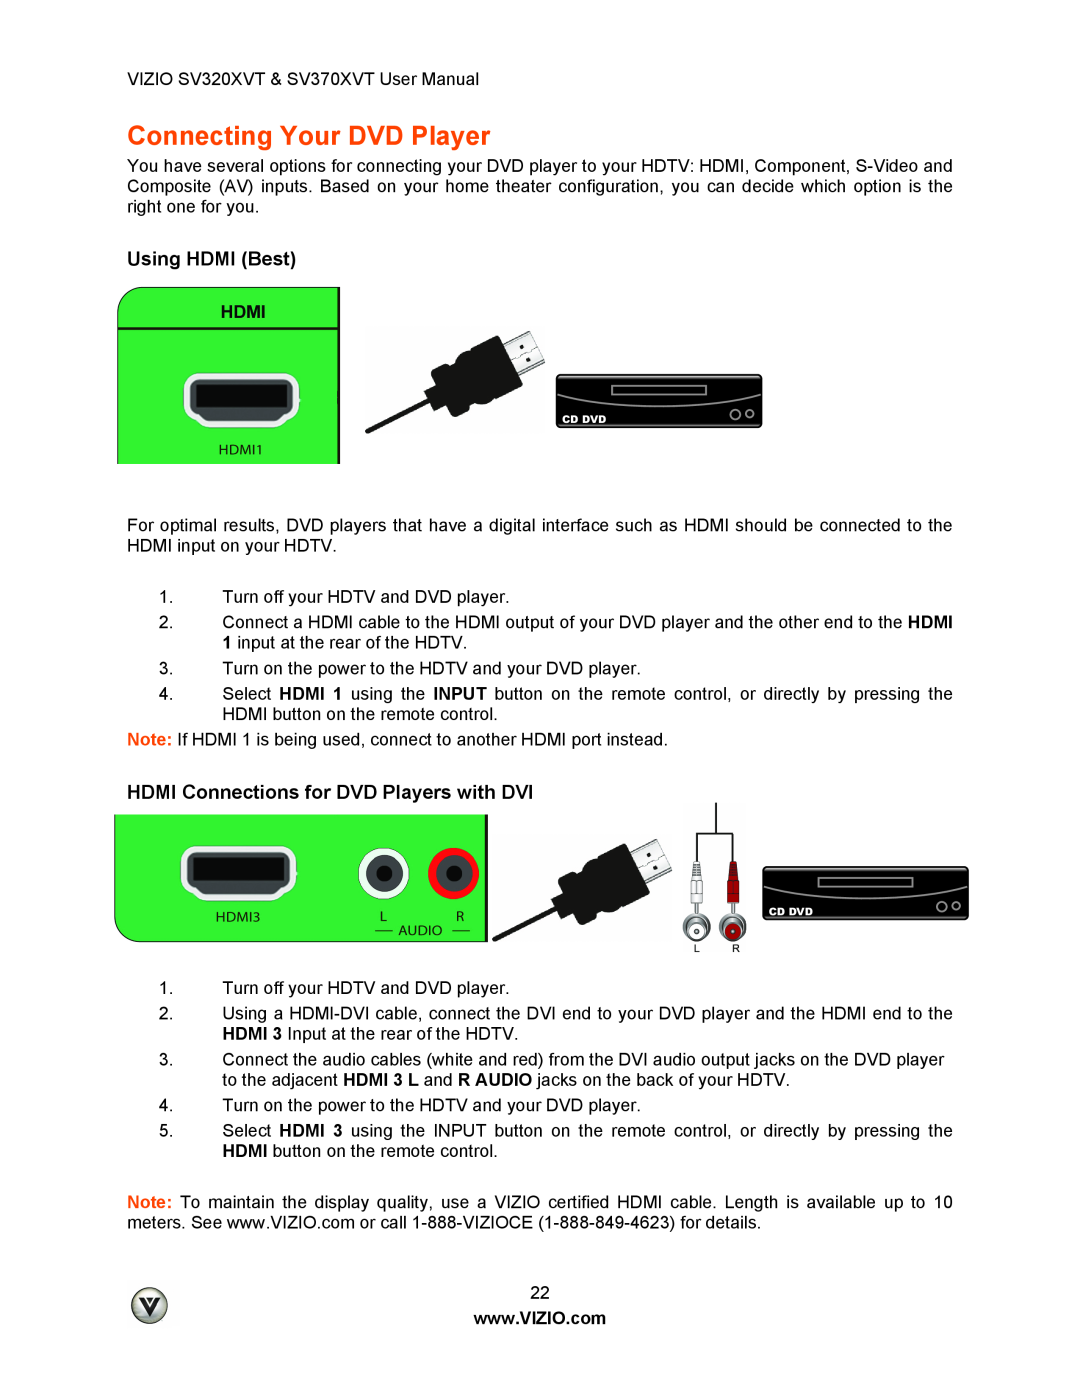 Vizio SV320XVT, SV370XVT user manual Connecting Your DVD Player, HDMI Connections for DVD Players with DVI, Using HDMI Best 